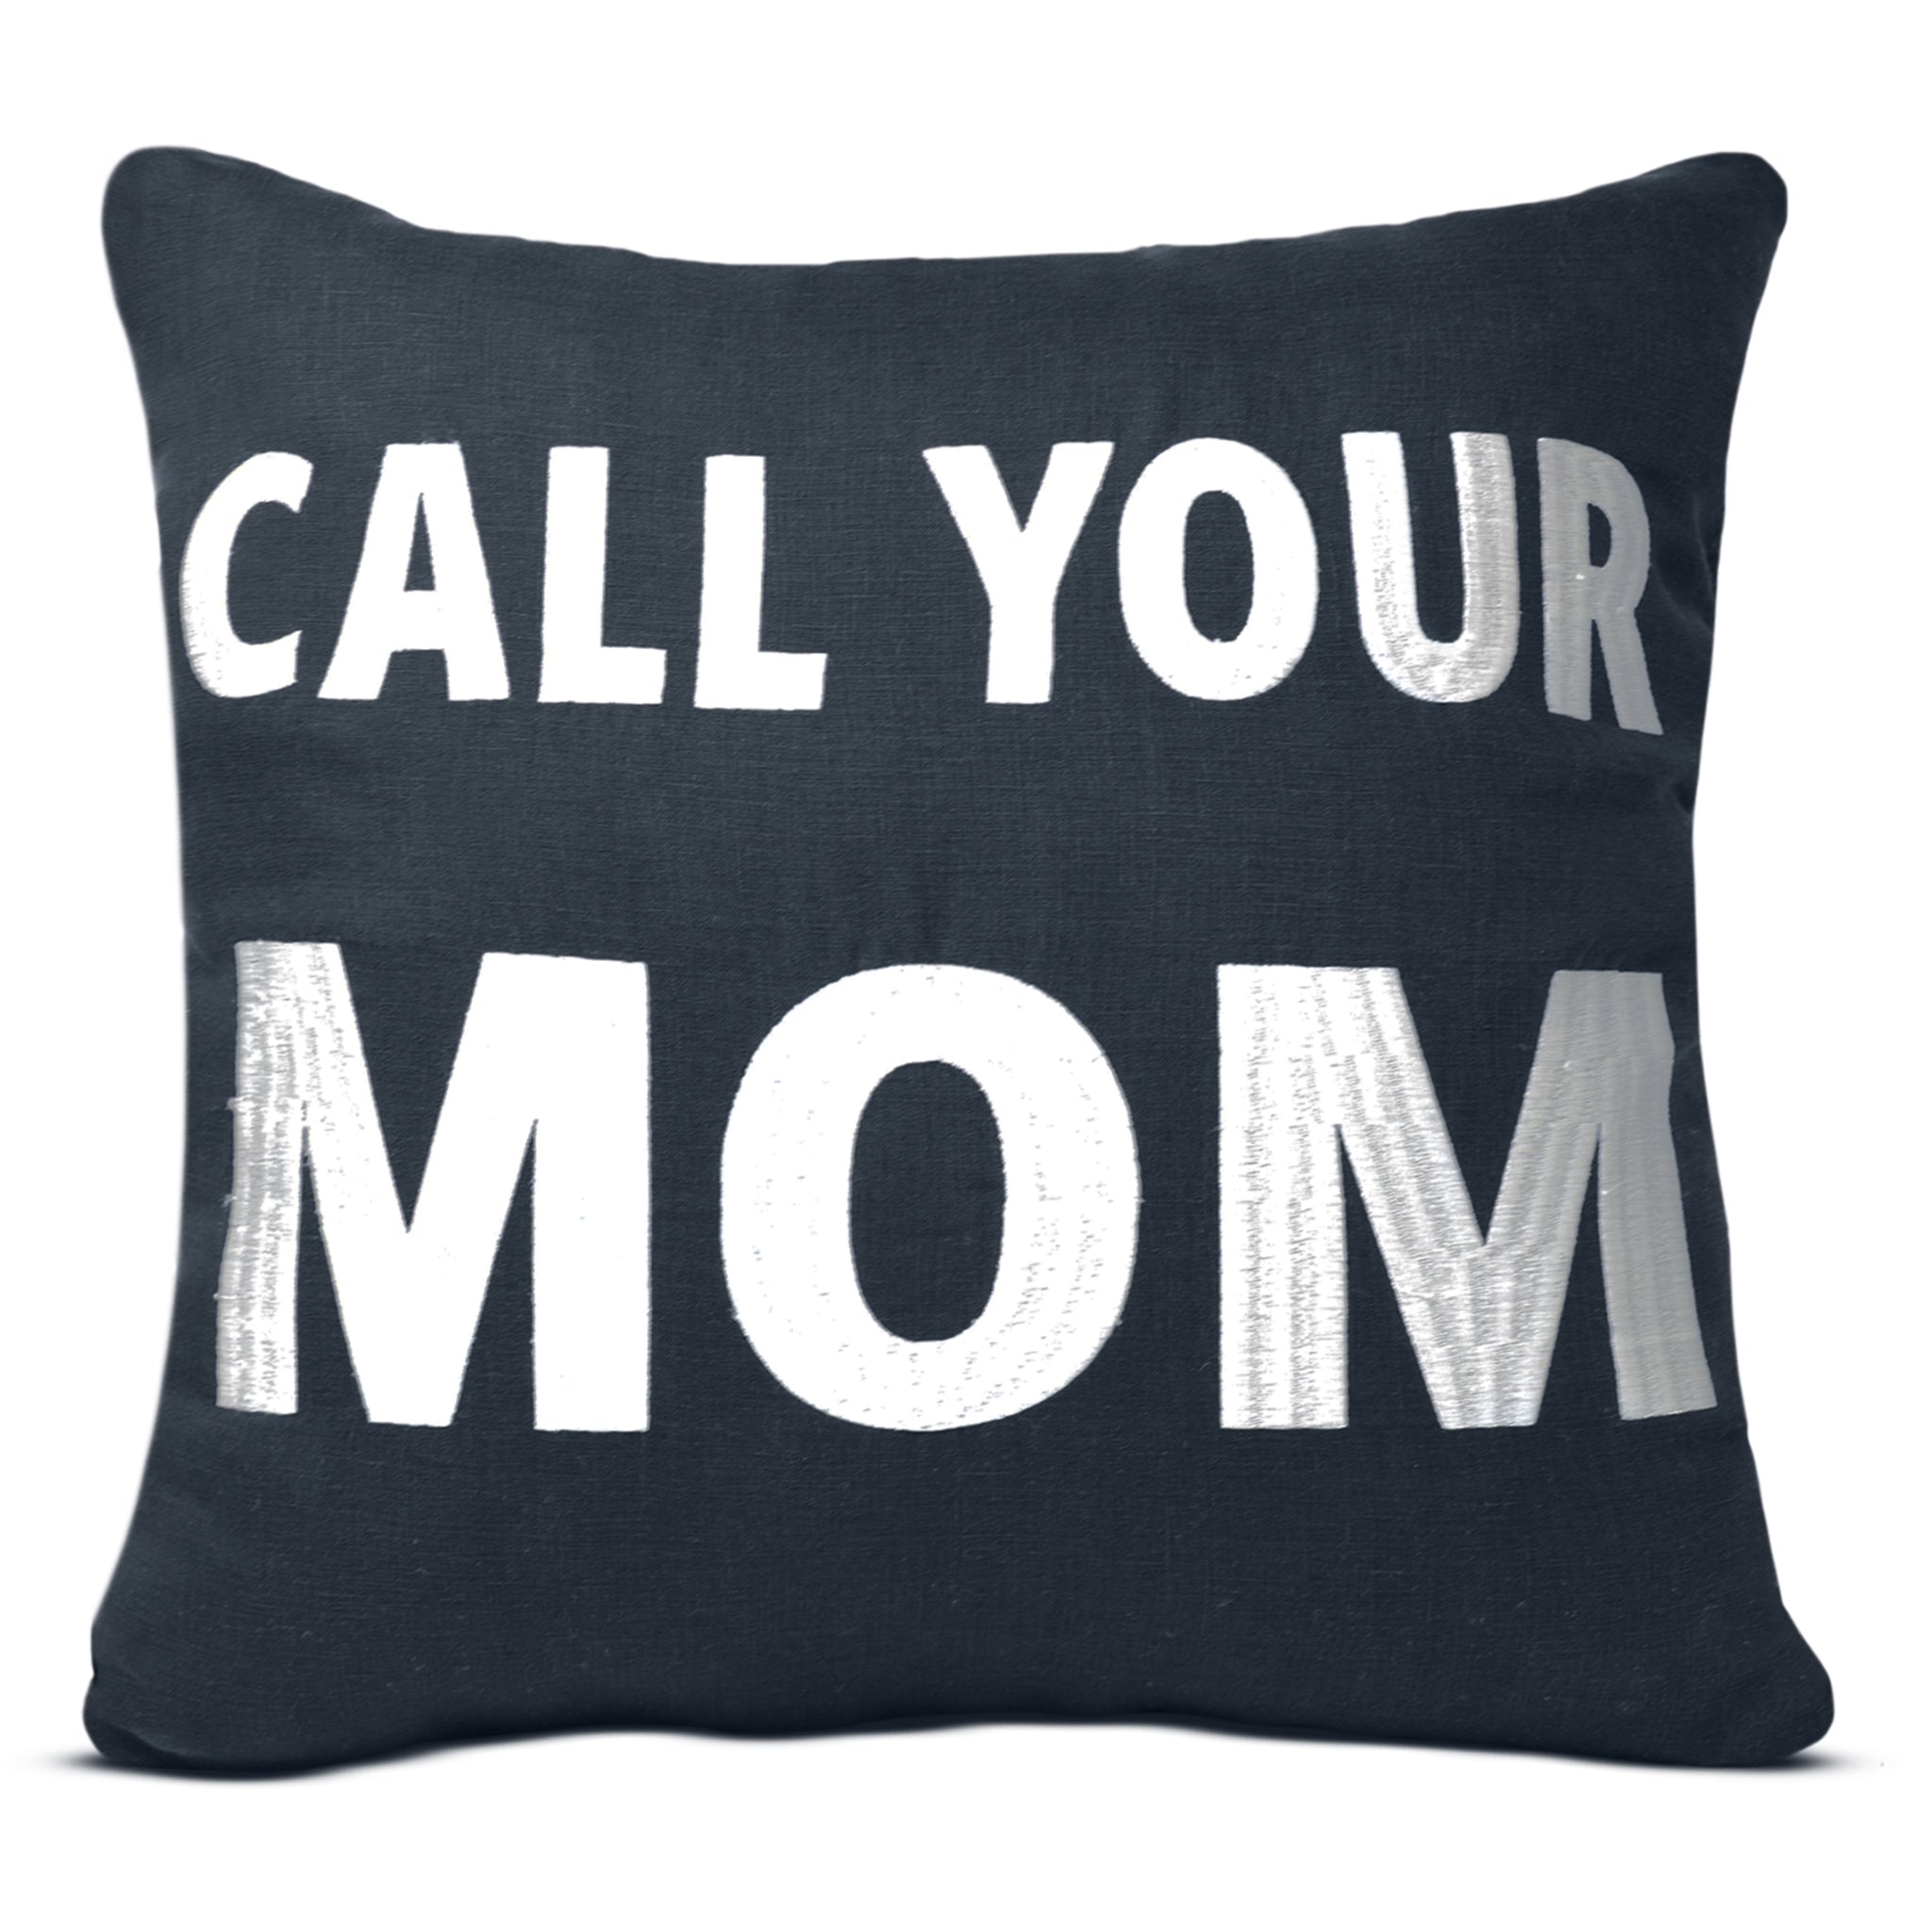 Call Your Mom Pillow Cover, Gift For Son Or Daughter